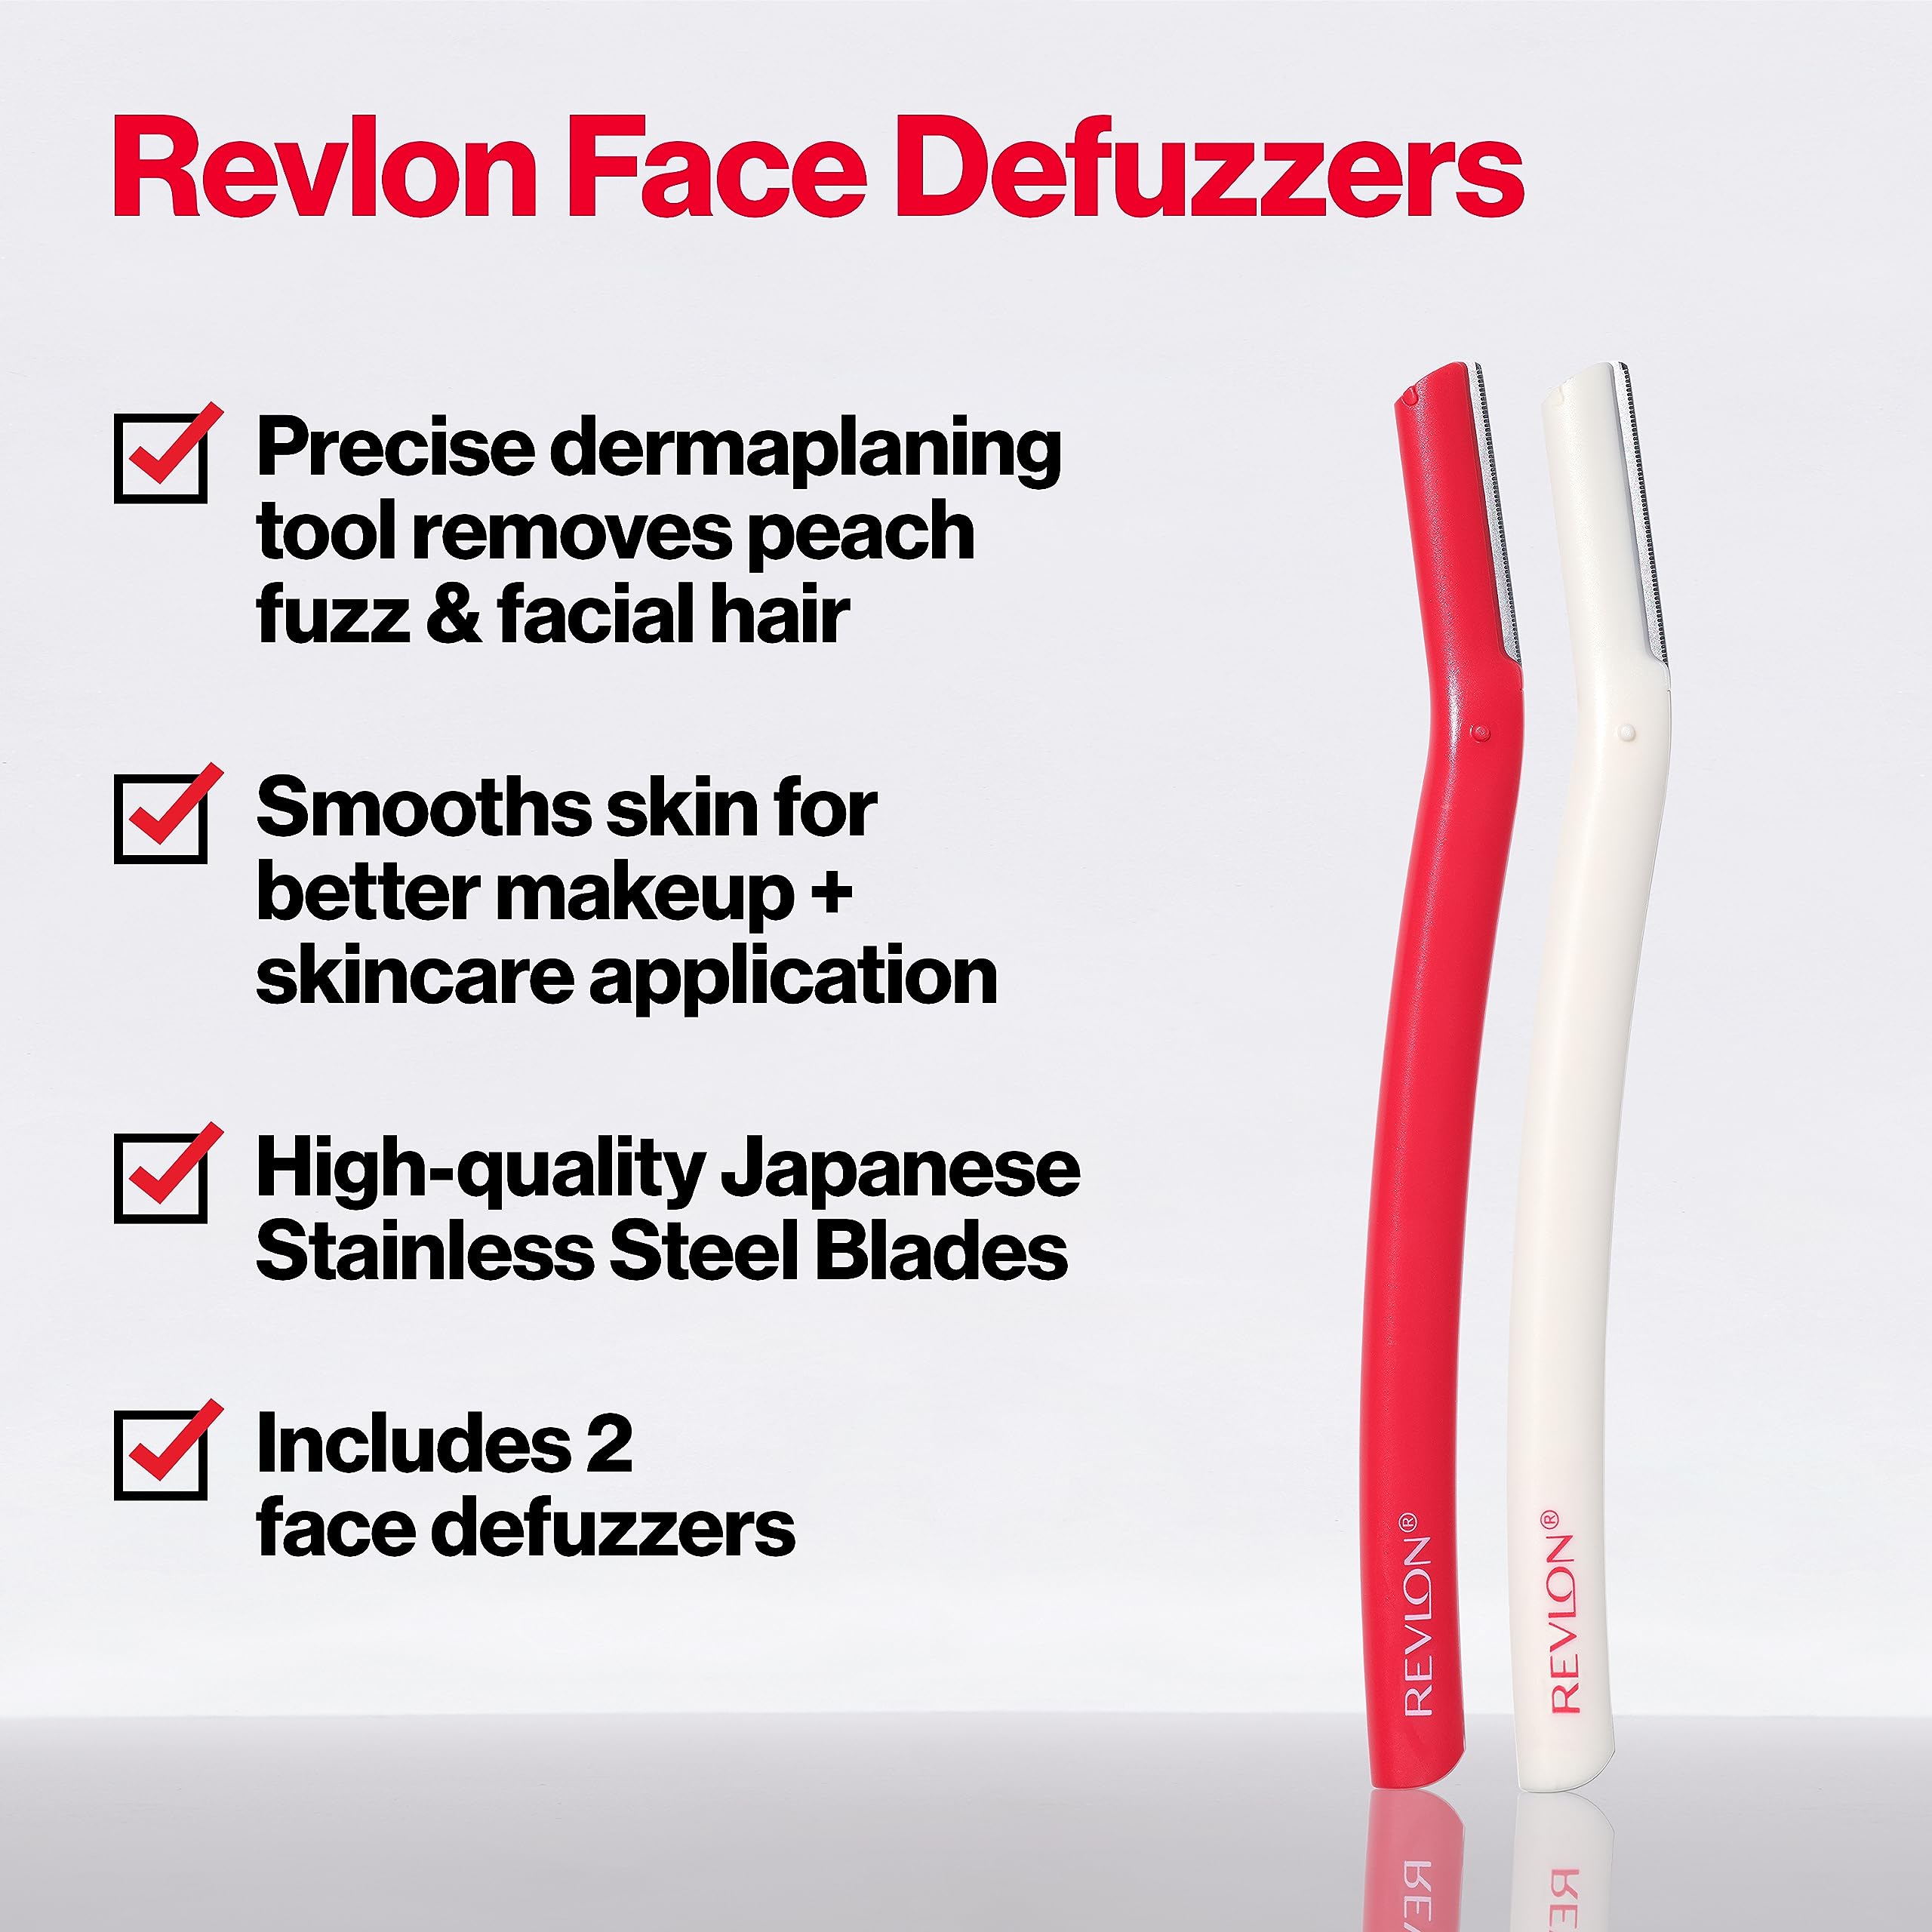 Revlon Dermaplaning Tool, Facial Razor & Hair Removal Tool, High Precision Blade,Smooth & Even Skin, Stainless Steel (Pack of 2)